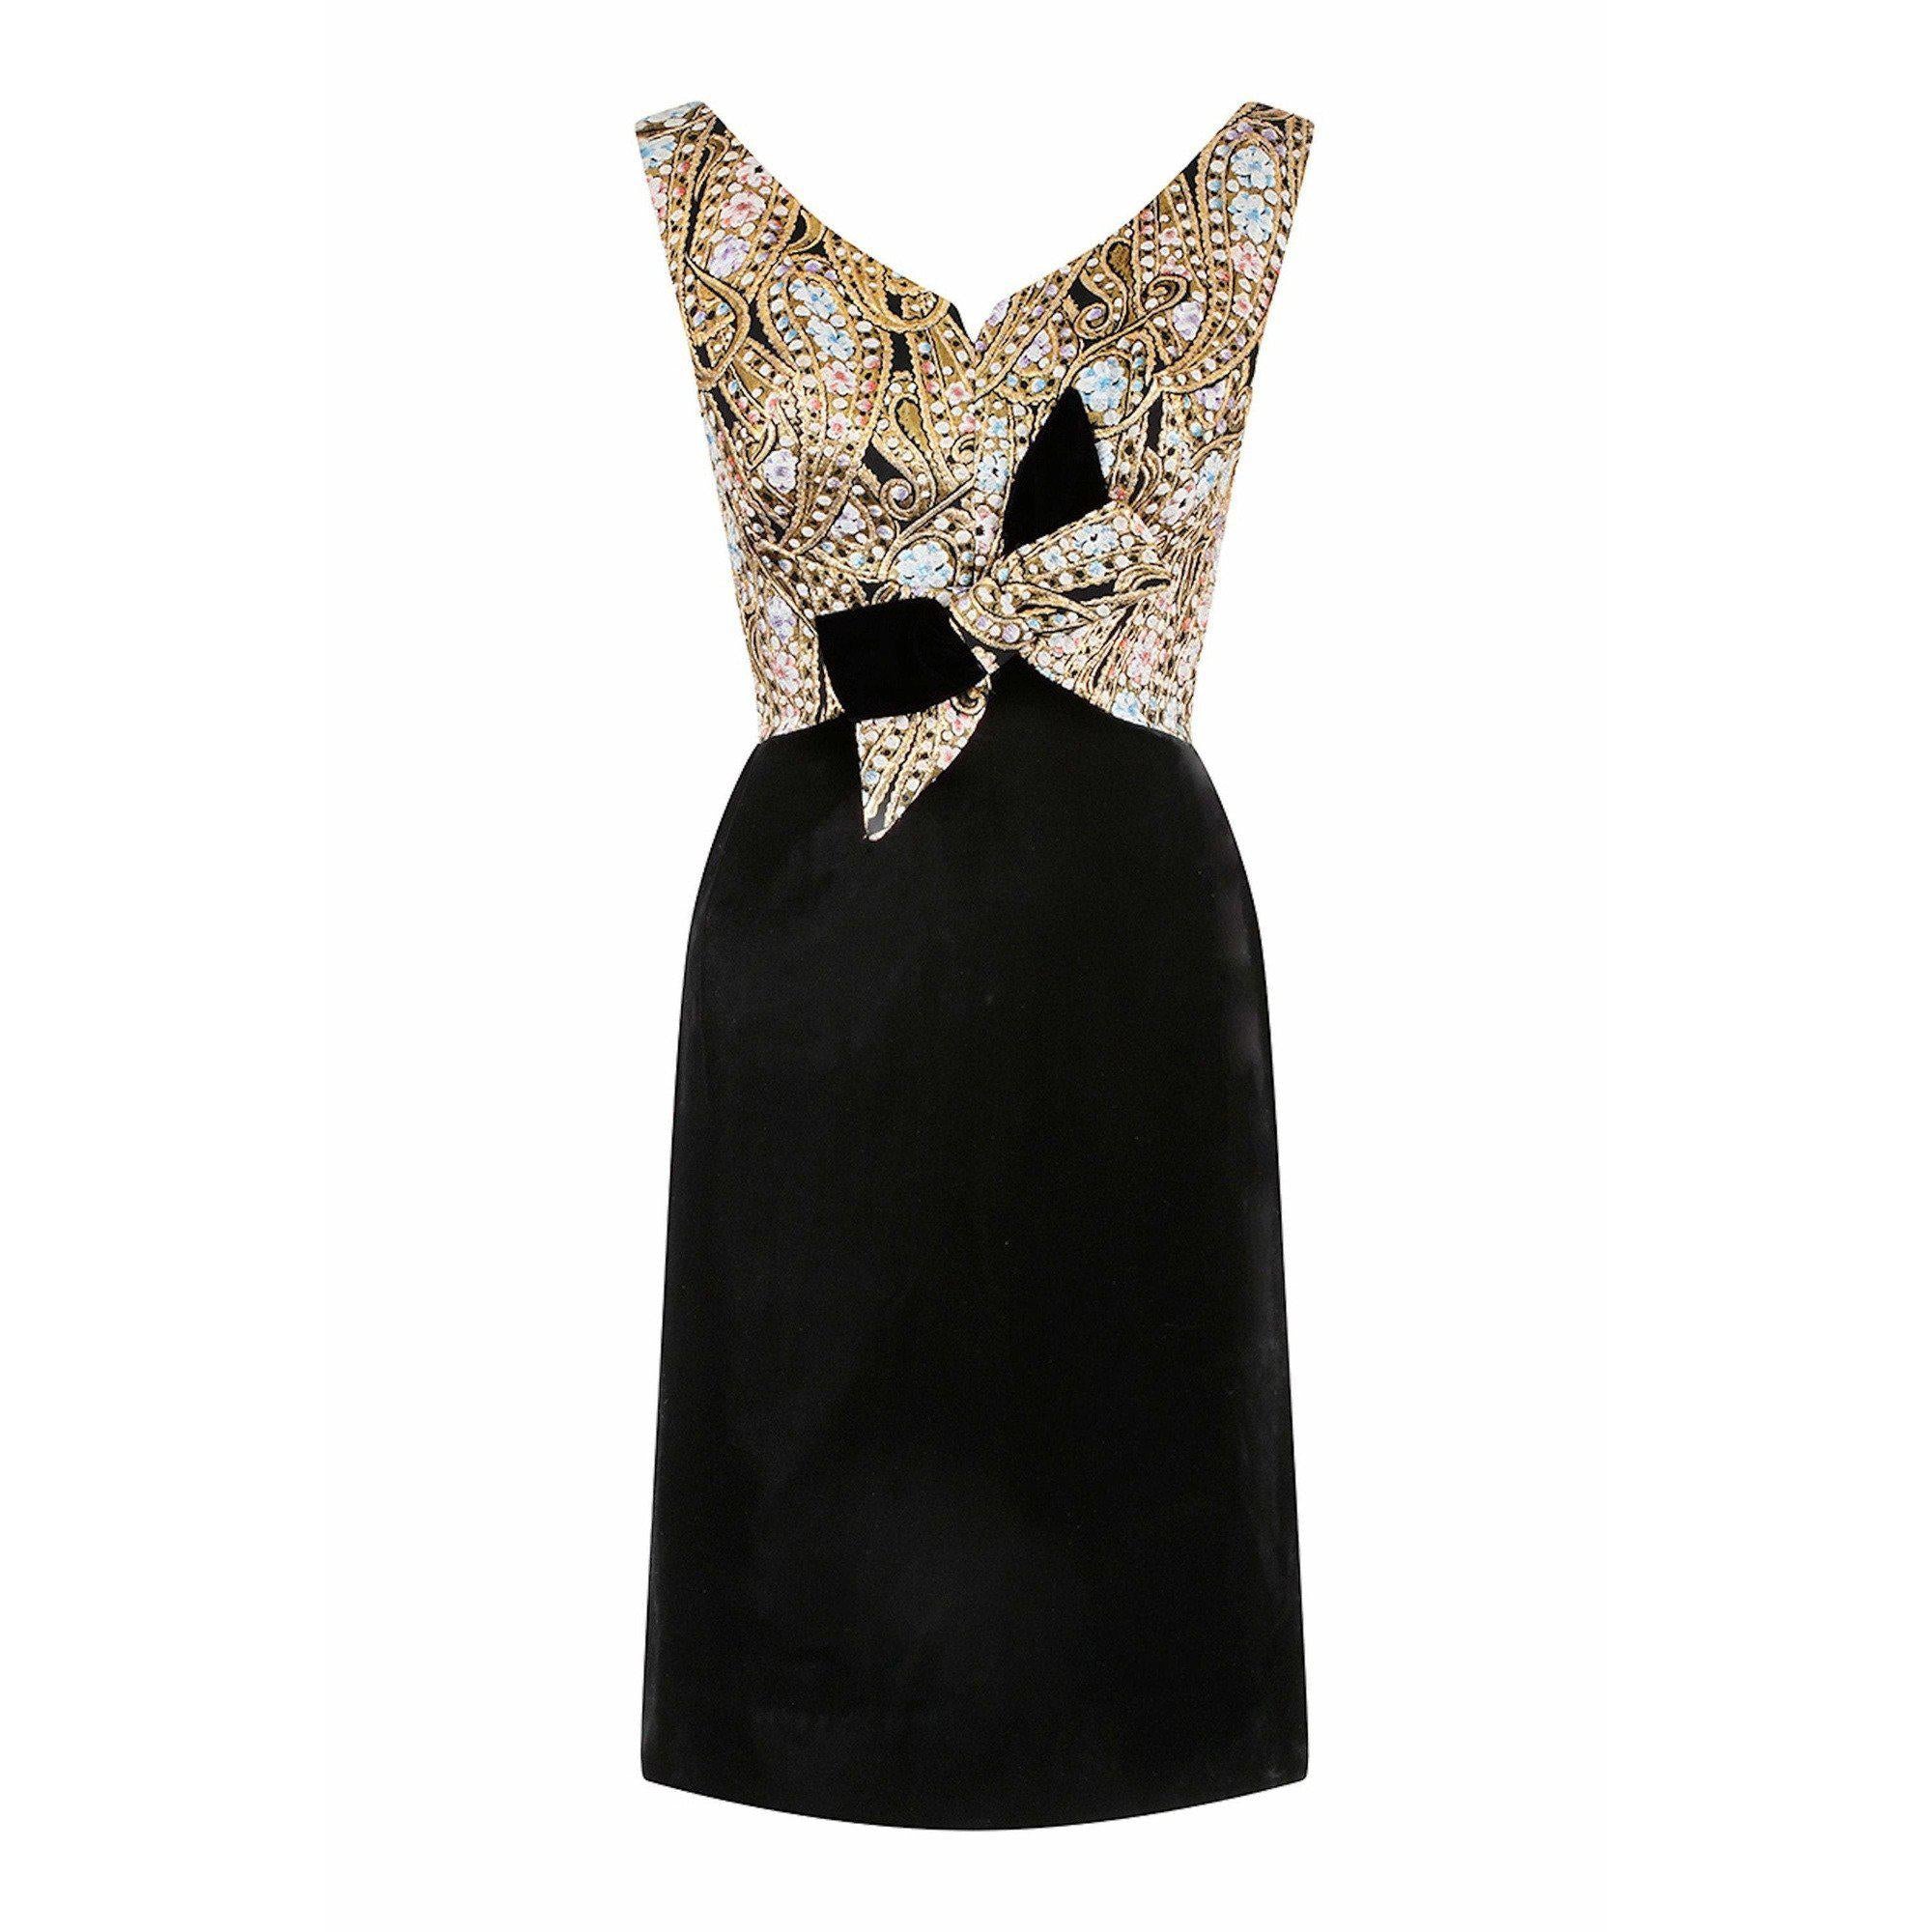 1960s Black Velvet and Gold Lamé Cocktail Dress With Bow Detail